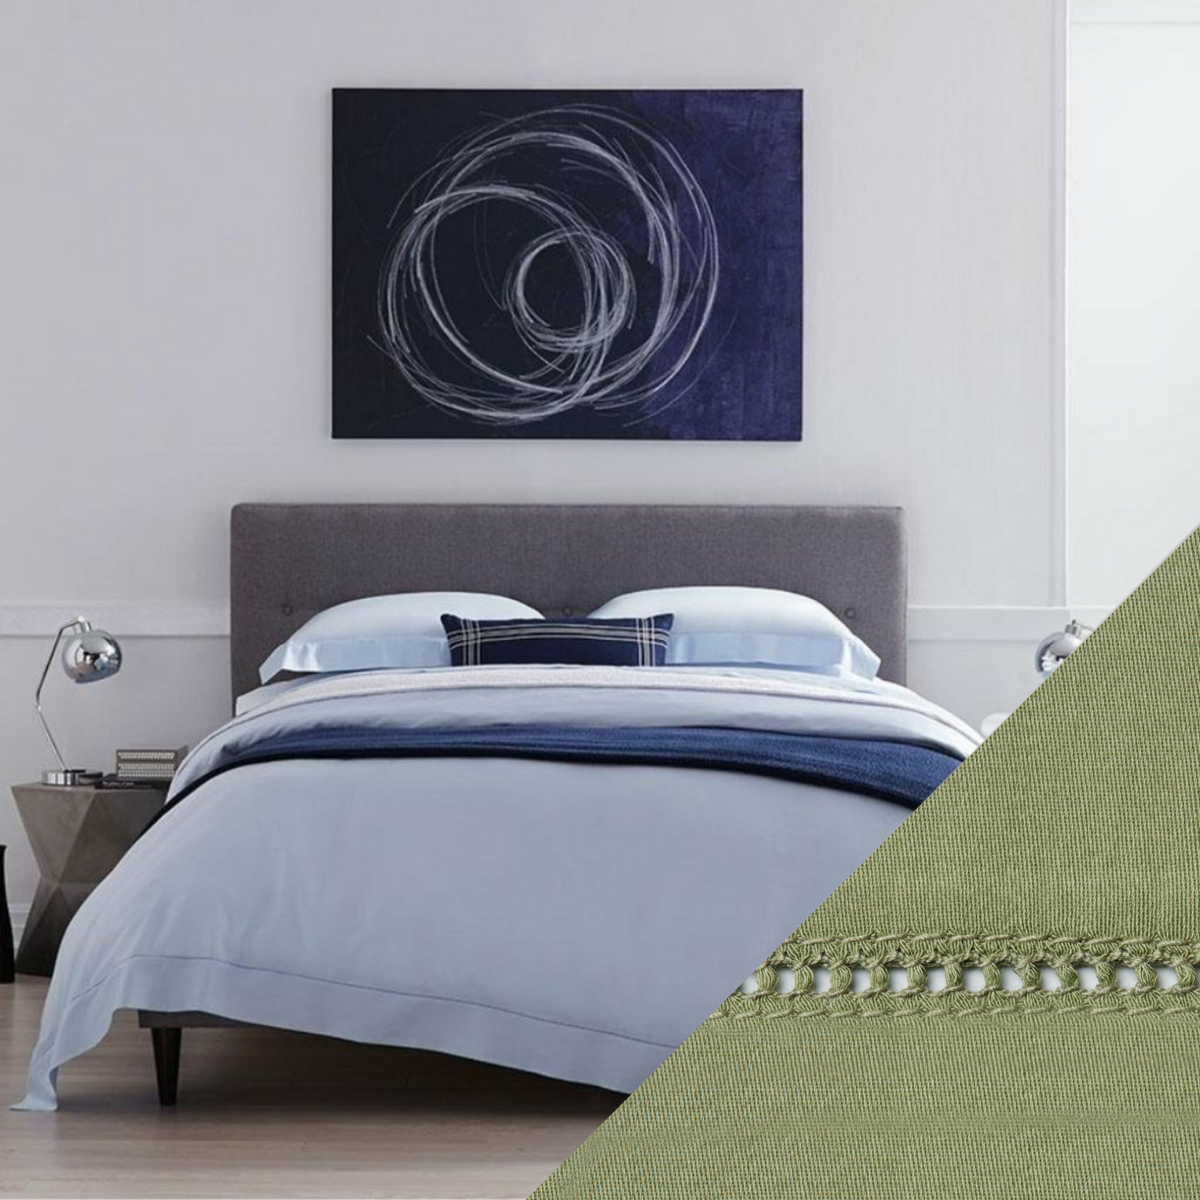 Full Lifestyle Image of Sferra Fiona Bedding with Swatch of Willow